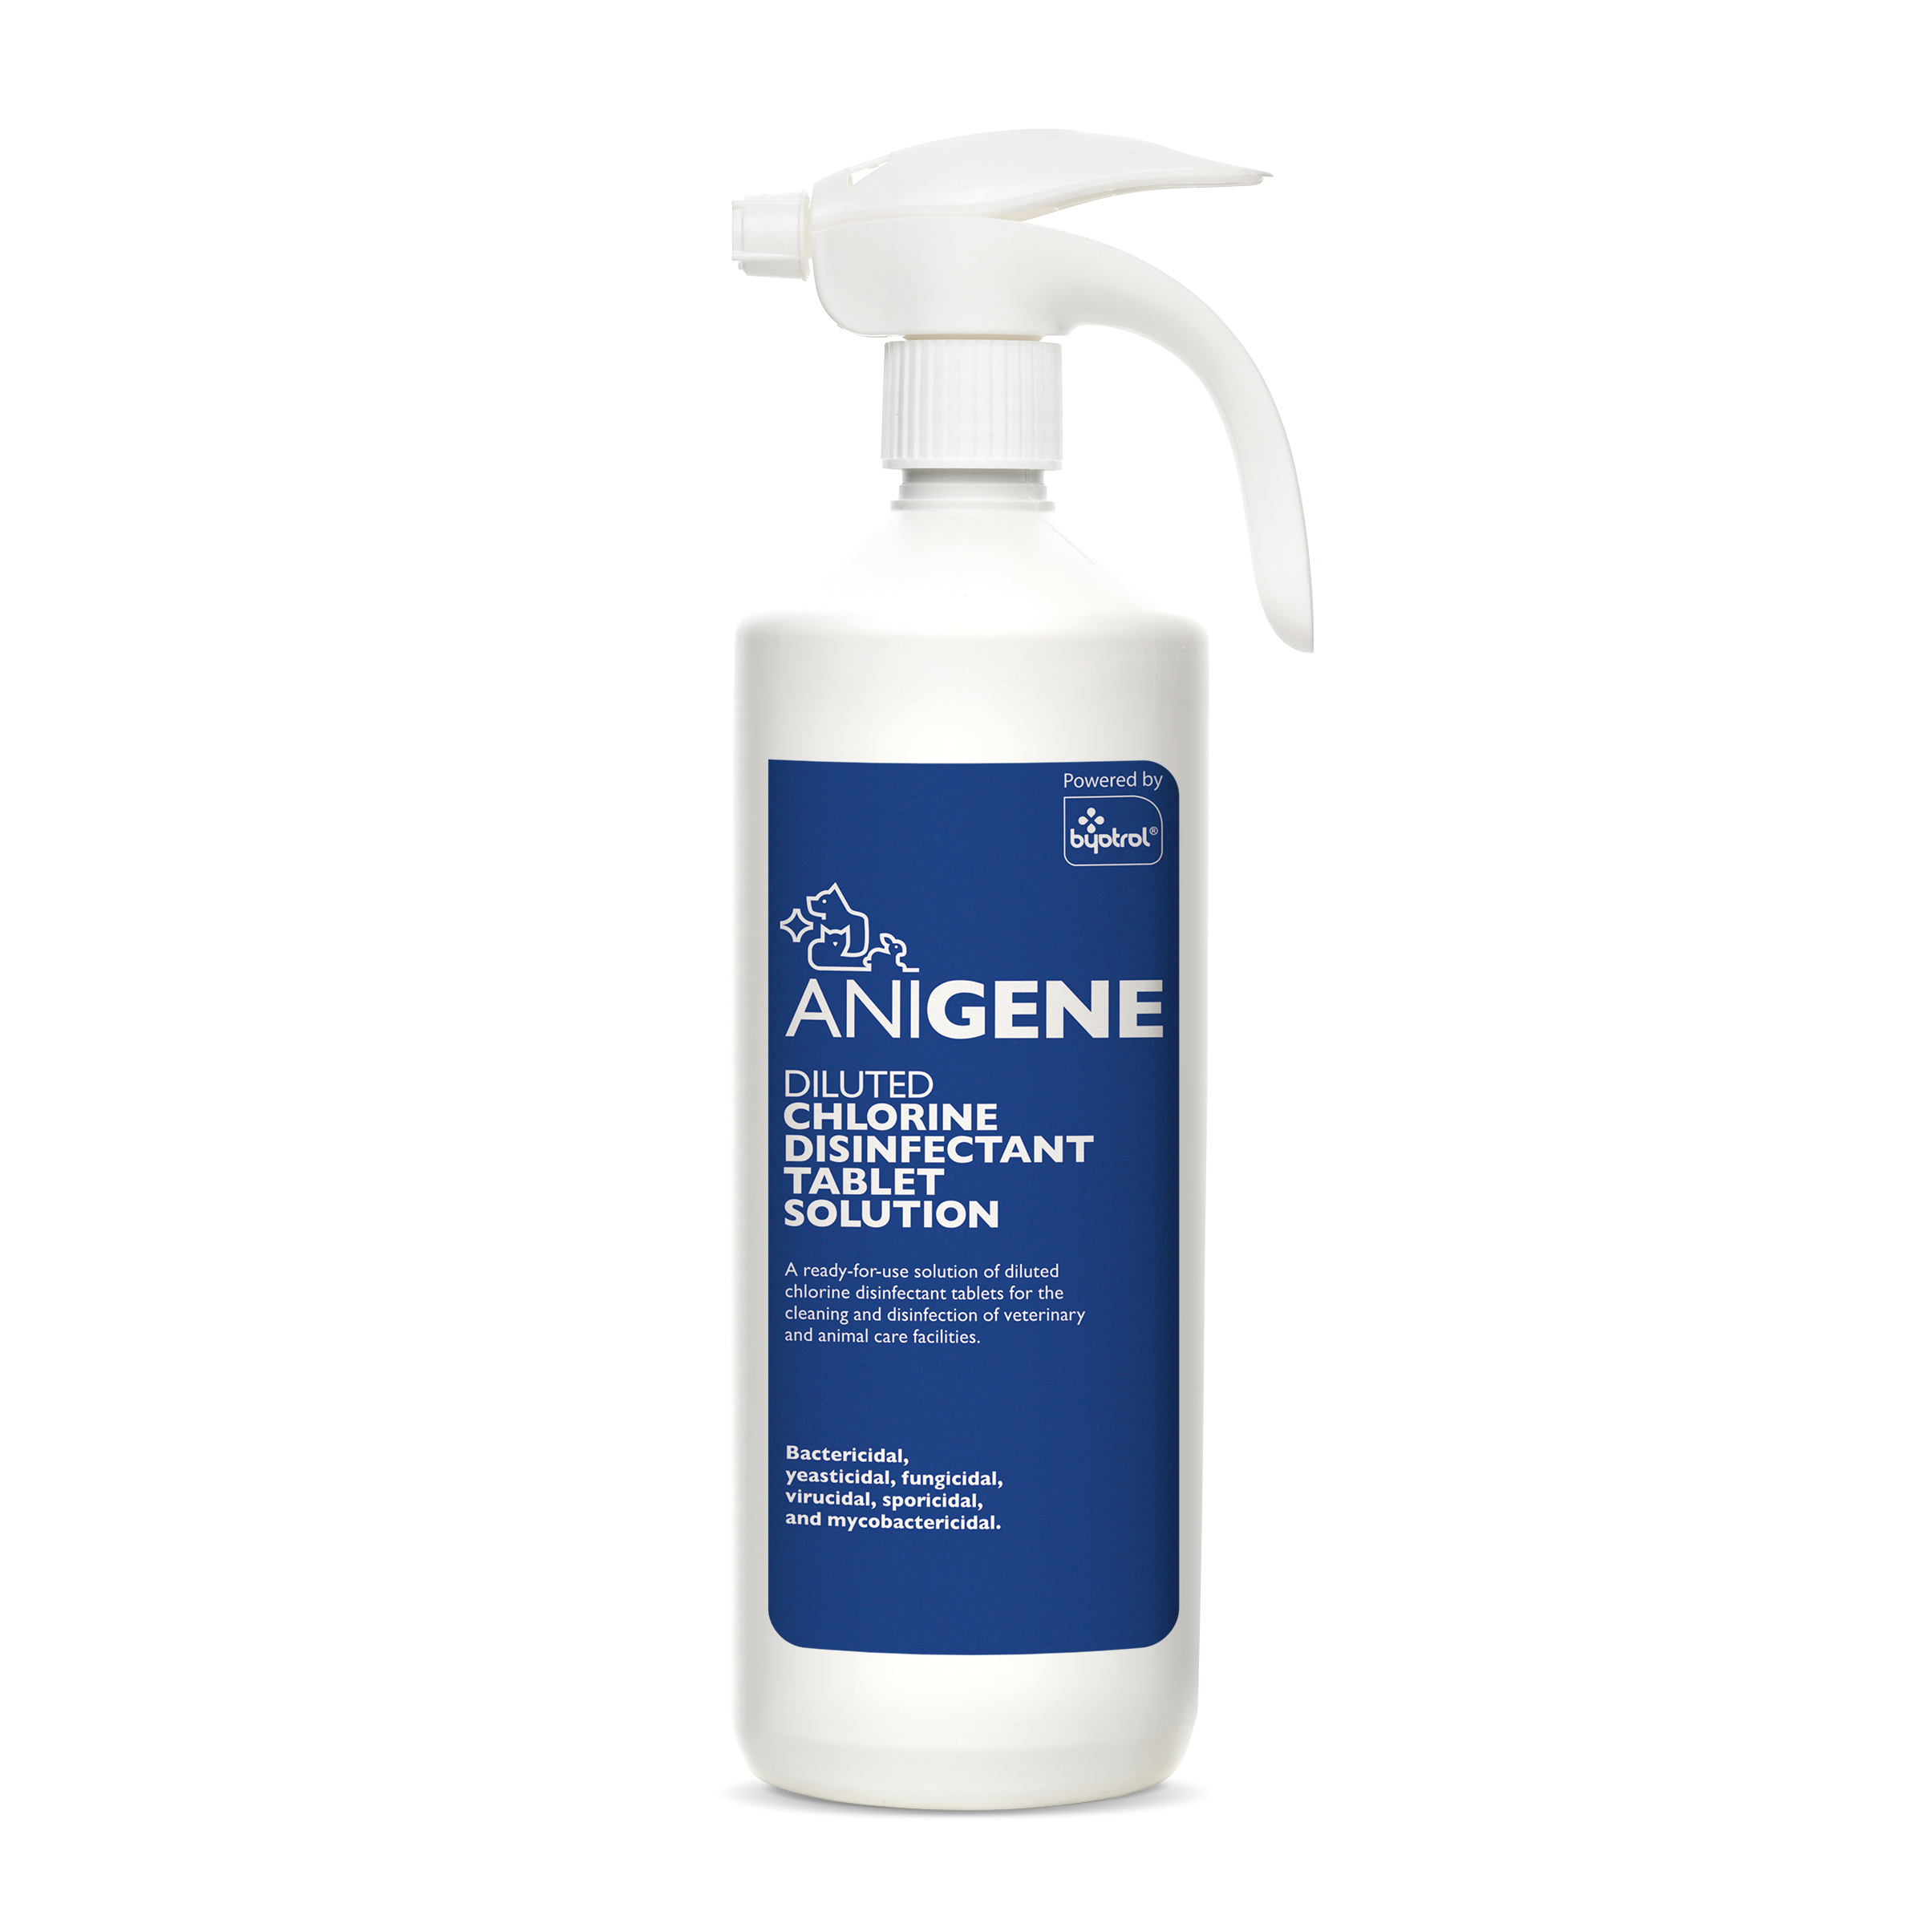 SKU071A_ANIGENE_Diluted_Disinfectant_Spray_RGB_S